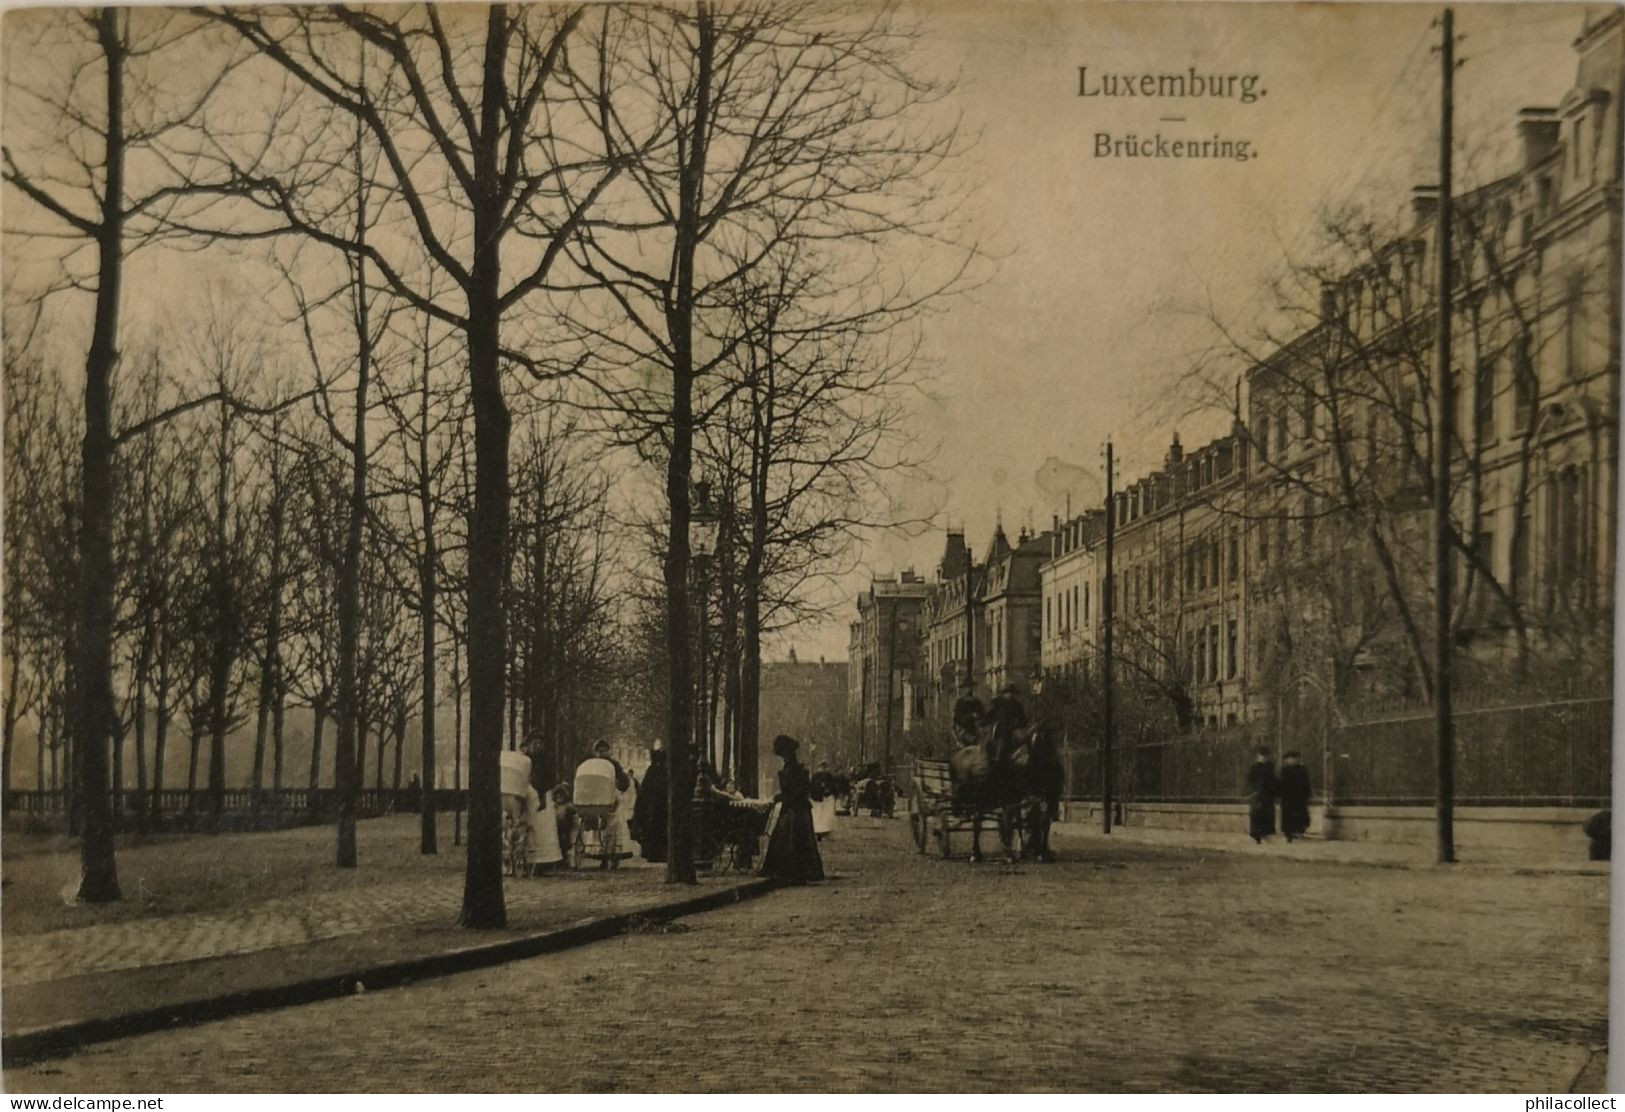 Luxembourg (Luxembourg) Bruckenring 19?? - Luxemburg - Stadt